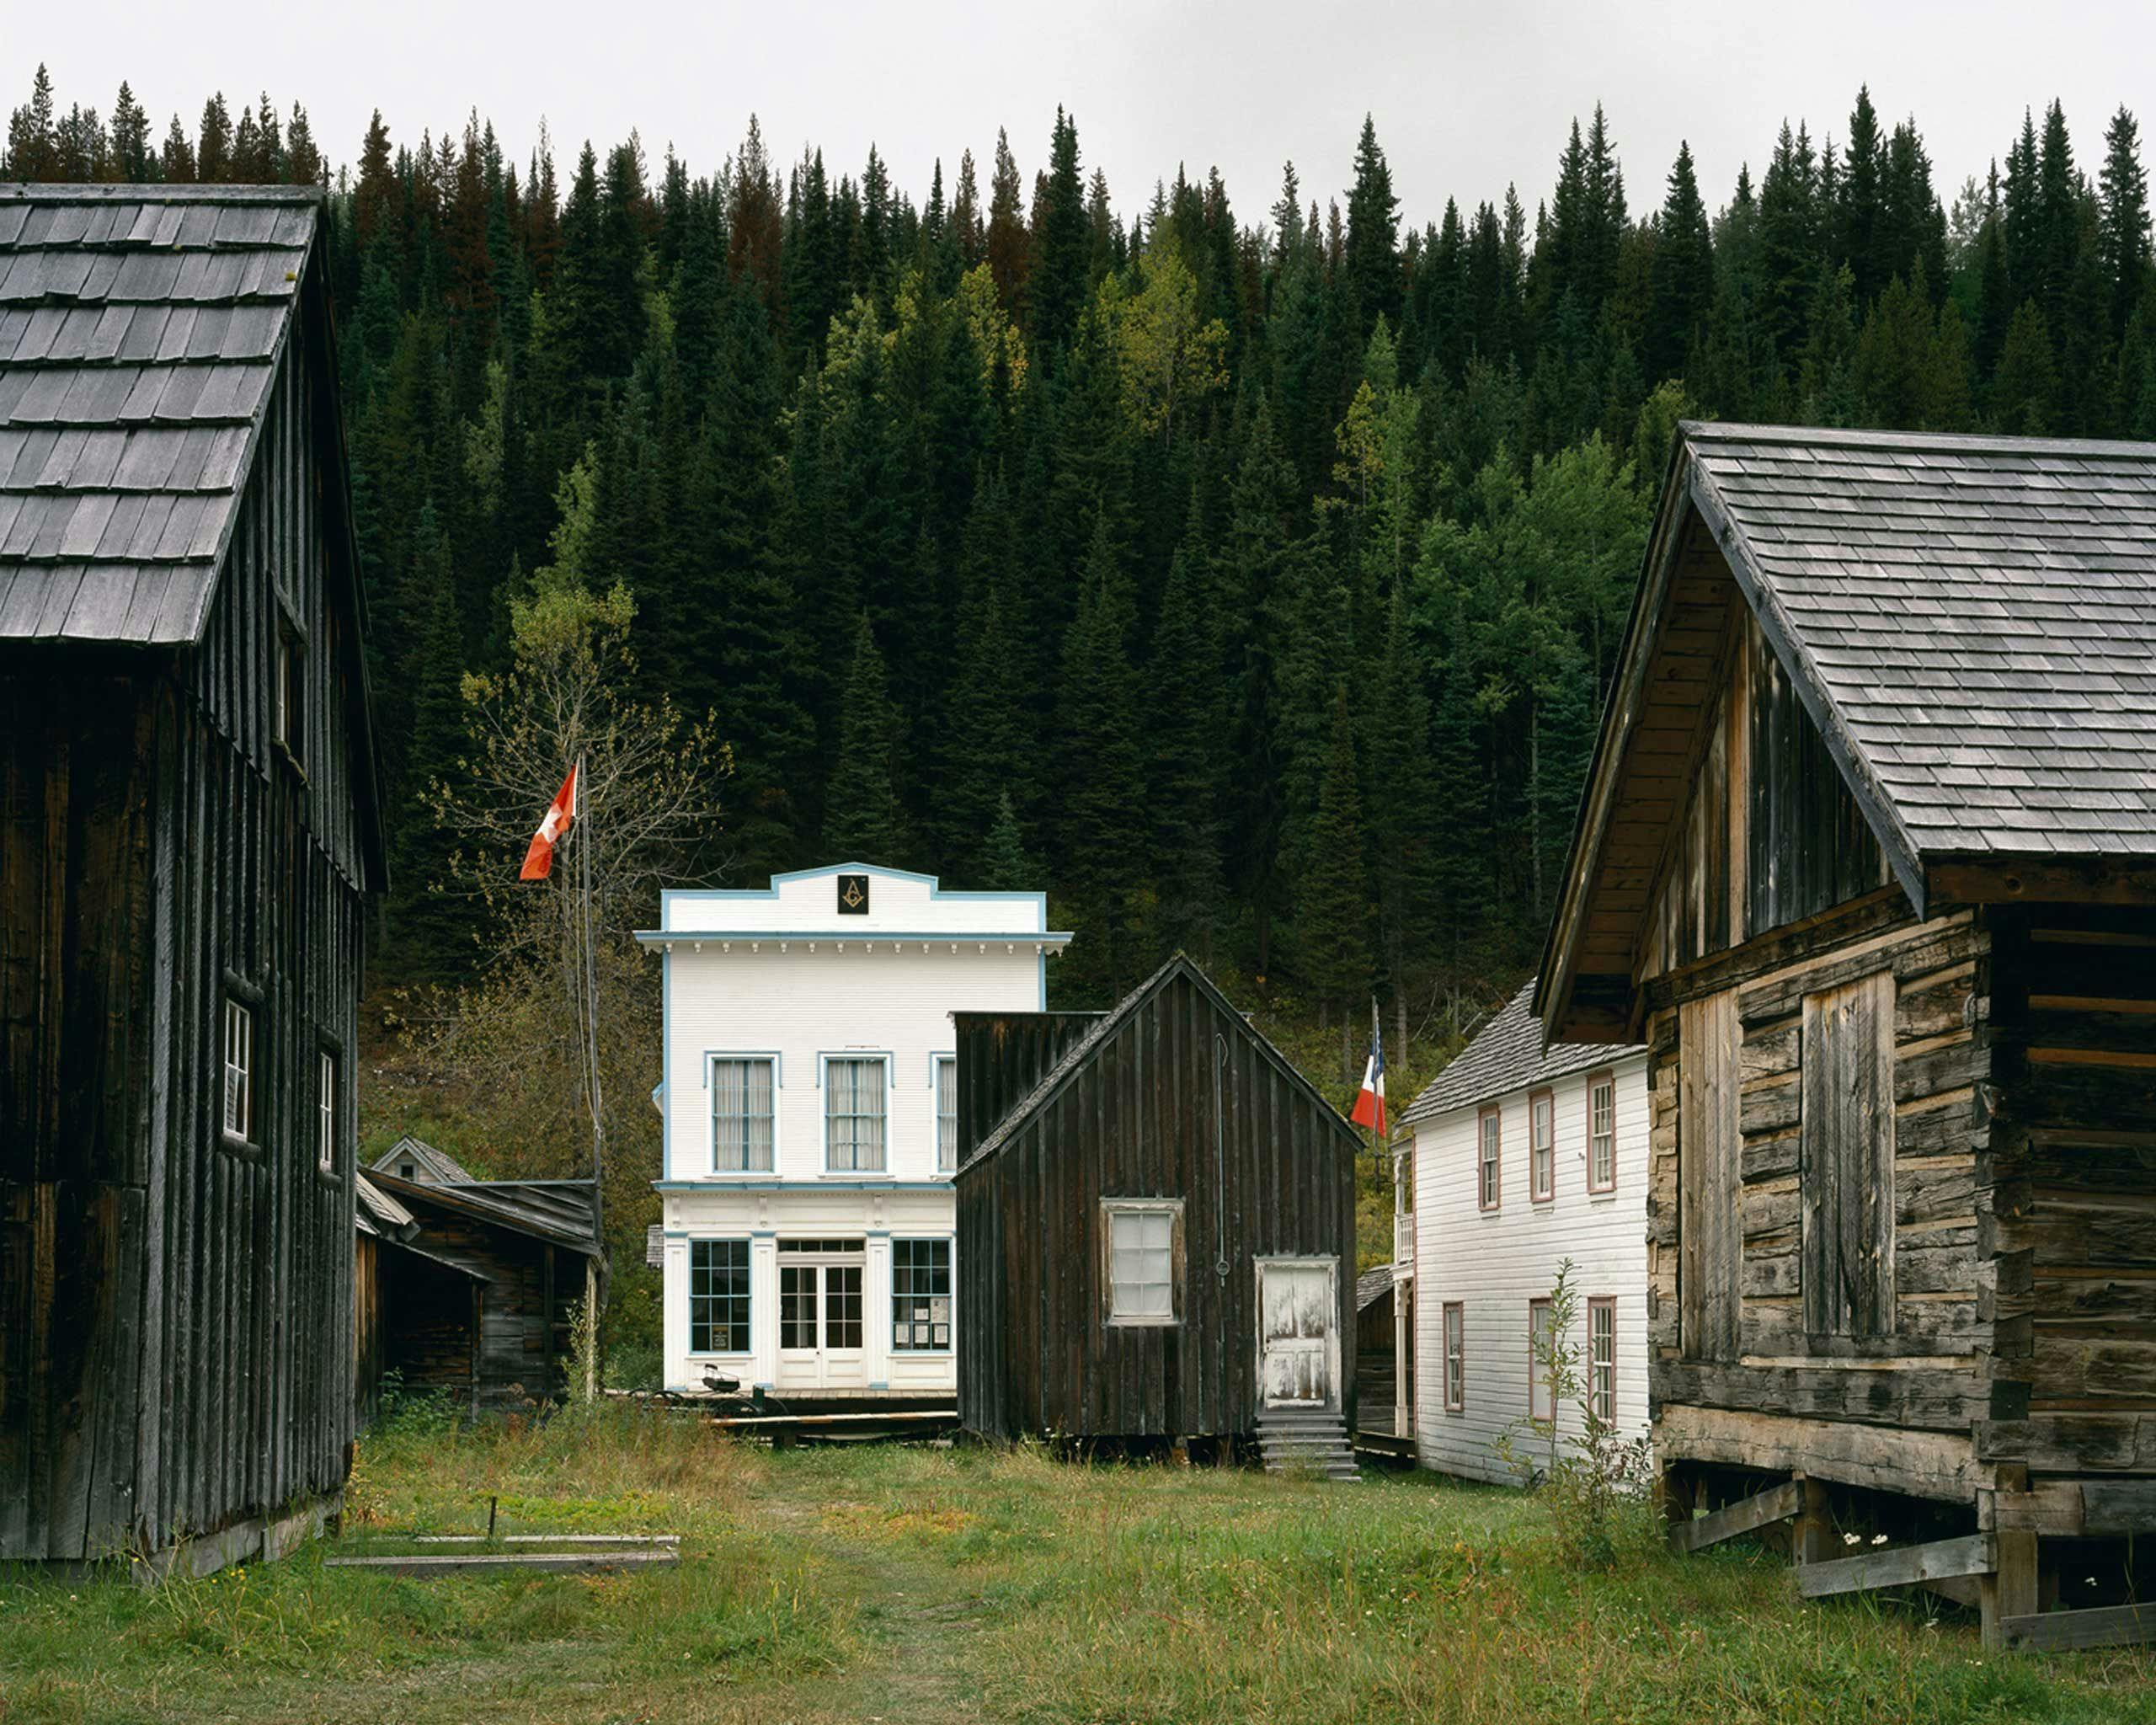 A photograph by Stan Douglas, titled Masonic Lodge, Barkerville, dated 2006.